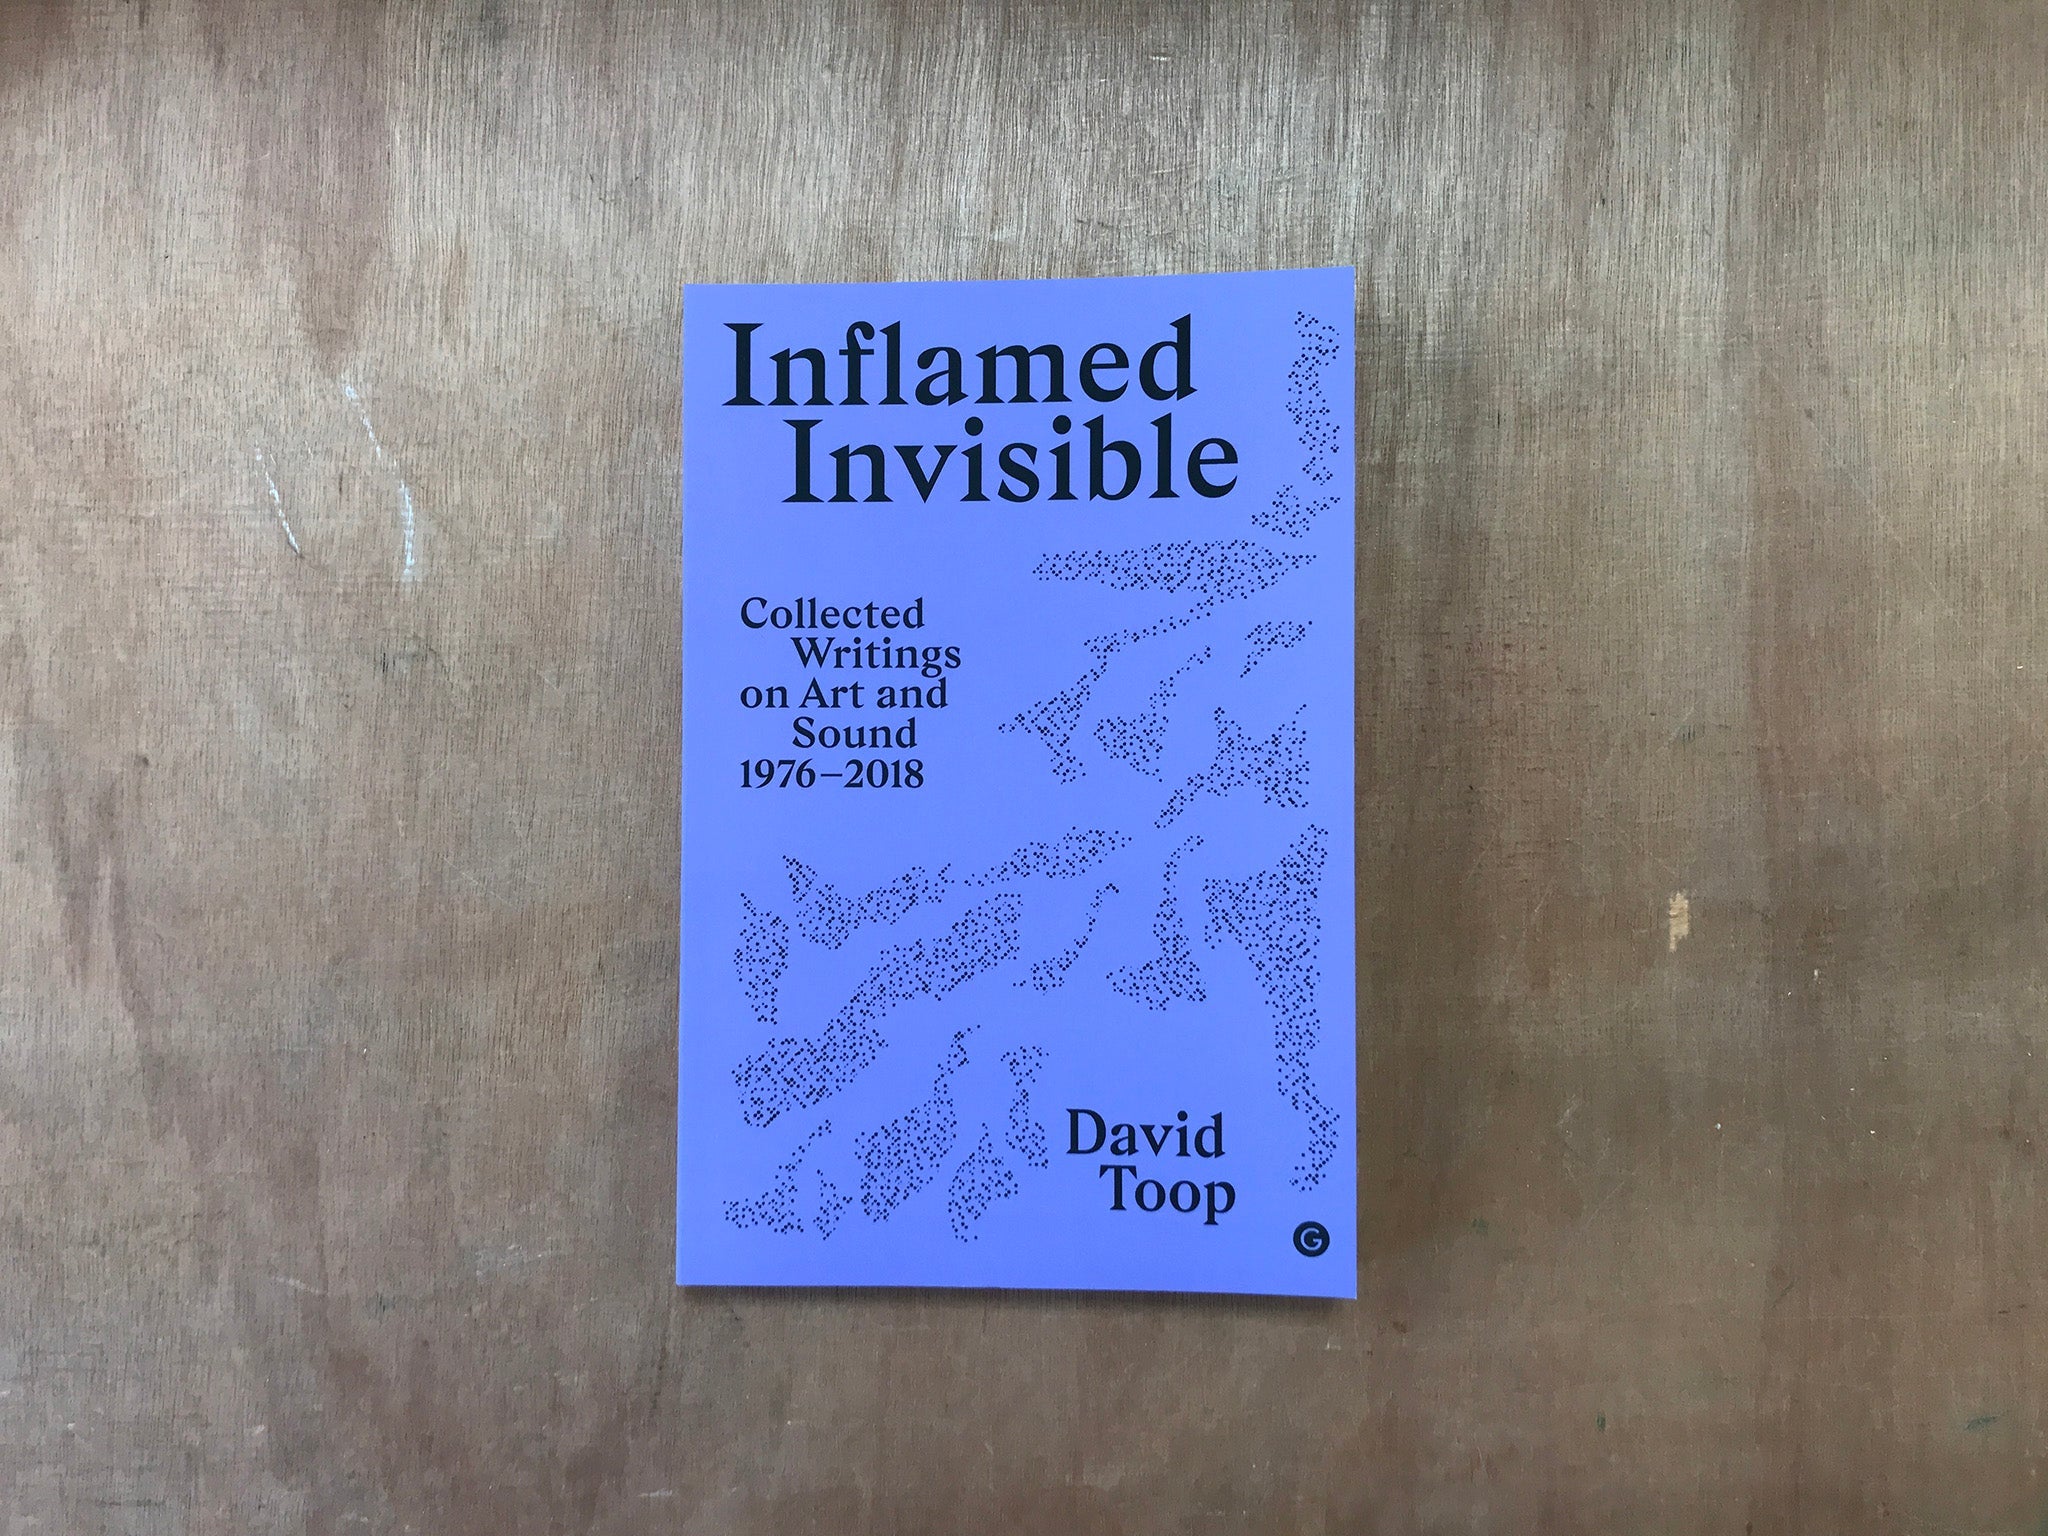 INFLAMED INVISIBLE by David Toop